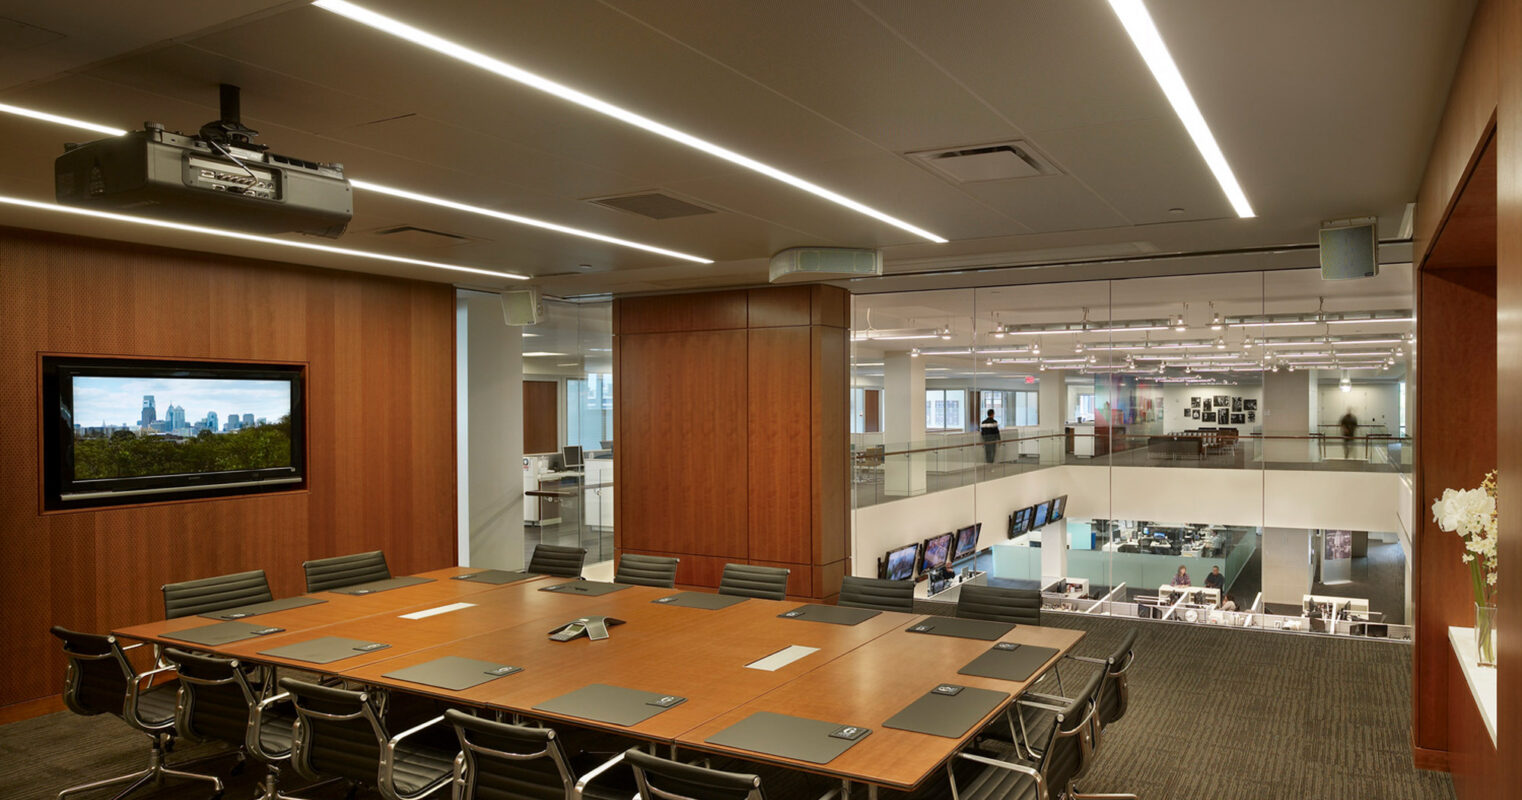 Modern conference room featuring sleek, rectangular table with built-in technology ports, surrounded by ergonomic chairs. Wood-paneled walls complement overhead linear LED lighting, with an adjacent open-office area visible through the glass partition, enhancing the sense of space.